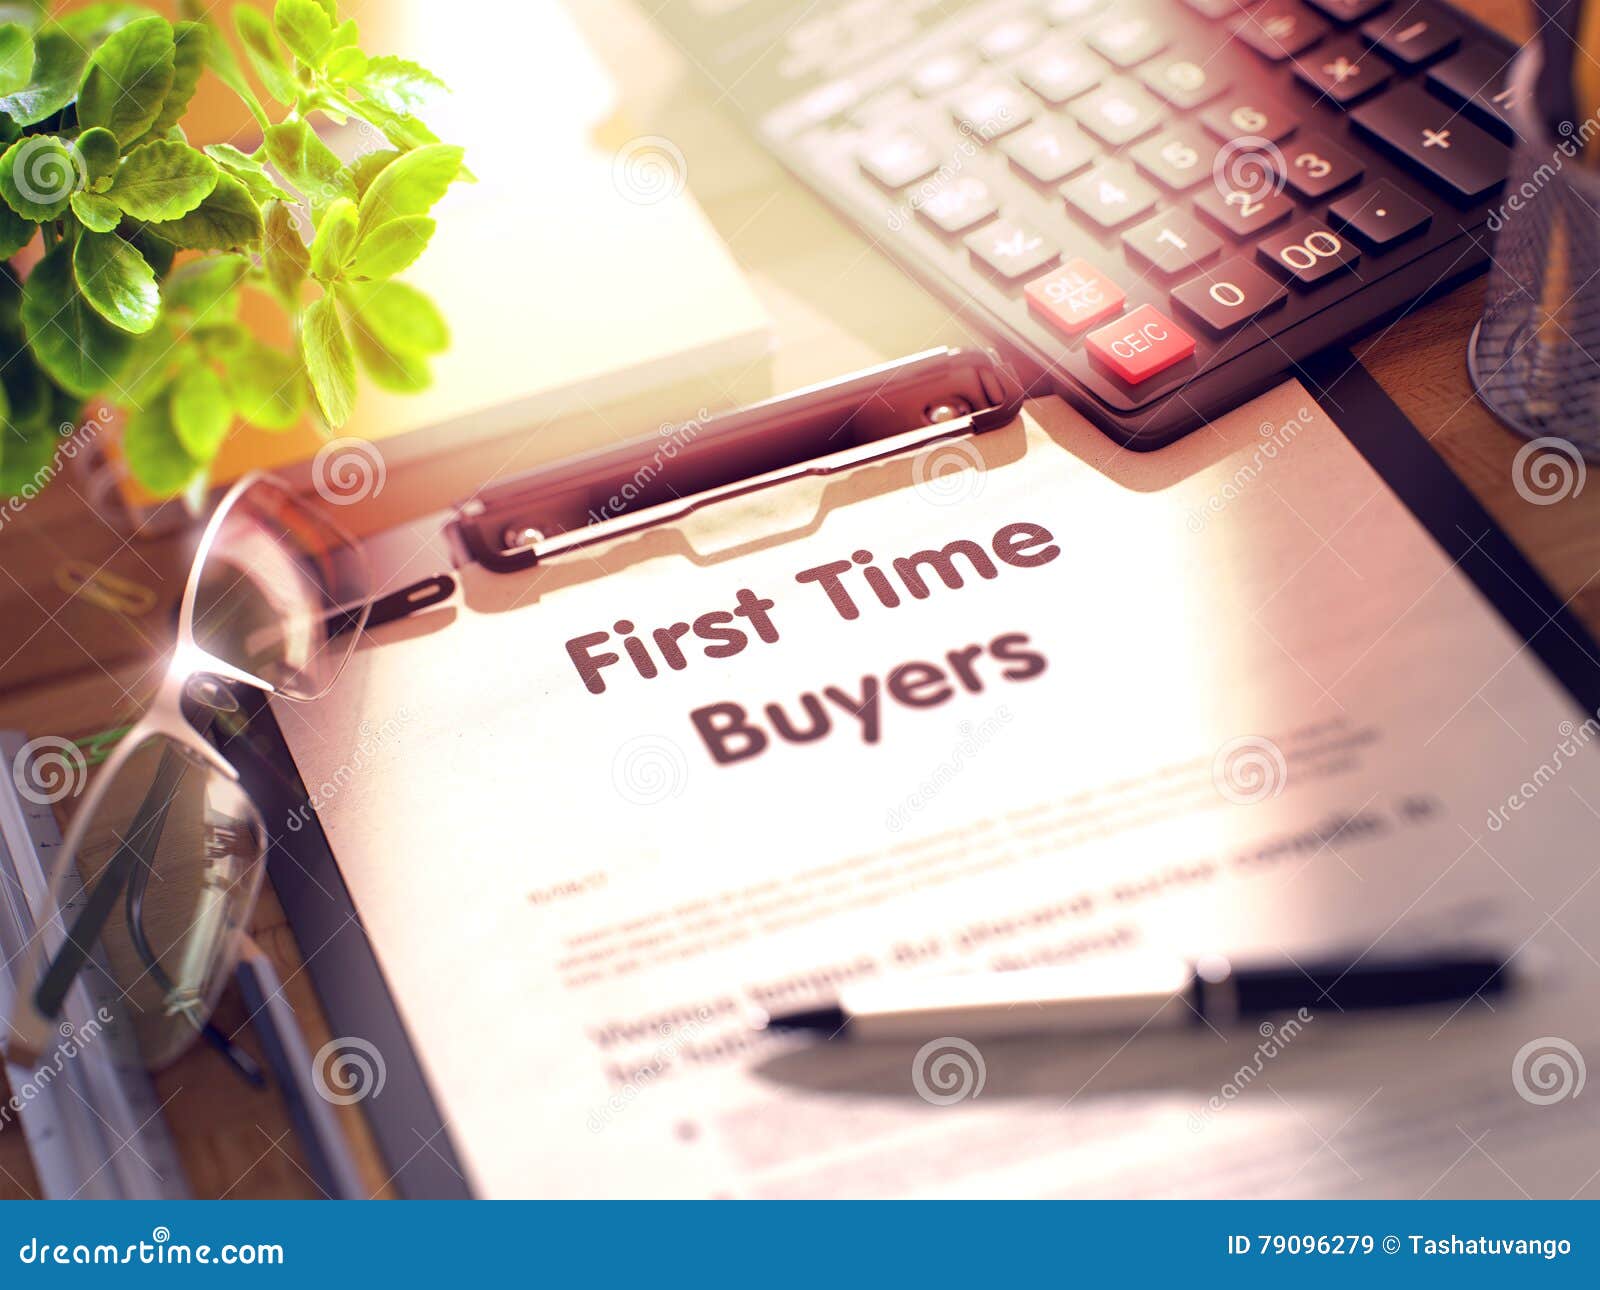 first time buyers concept on clipboard. 3d.